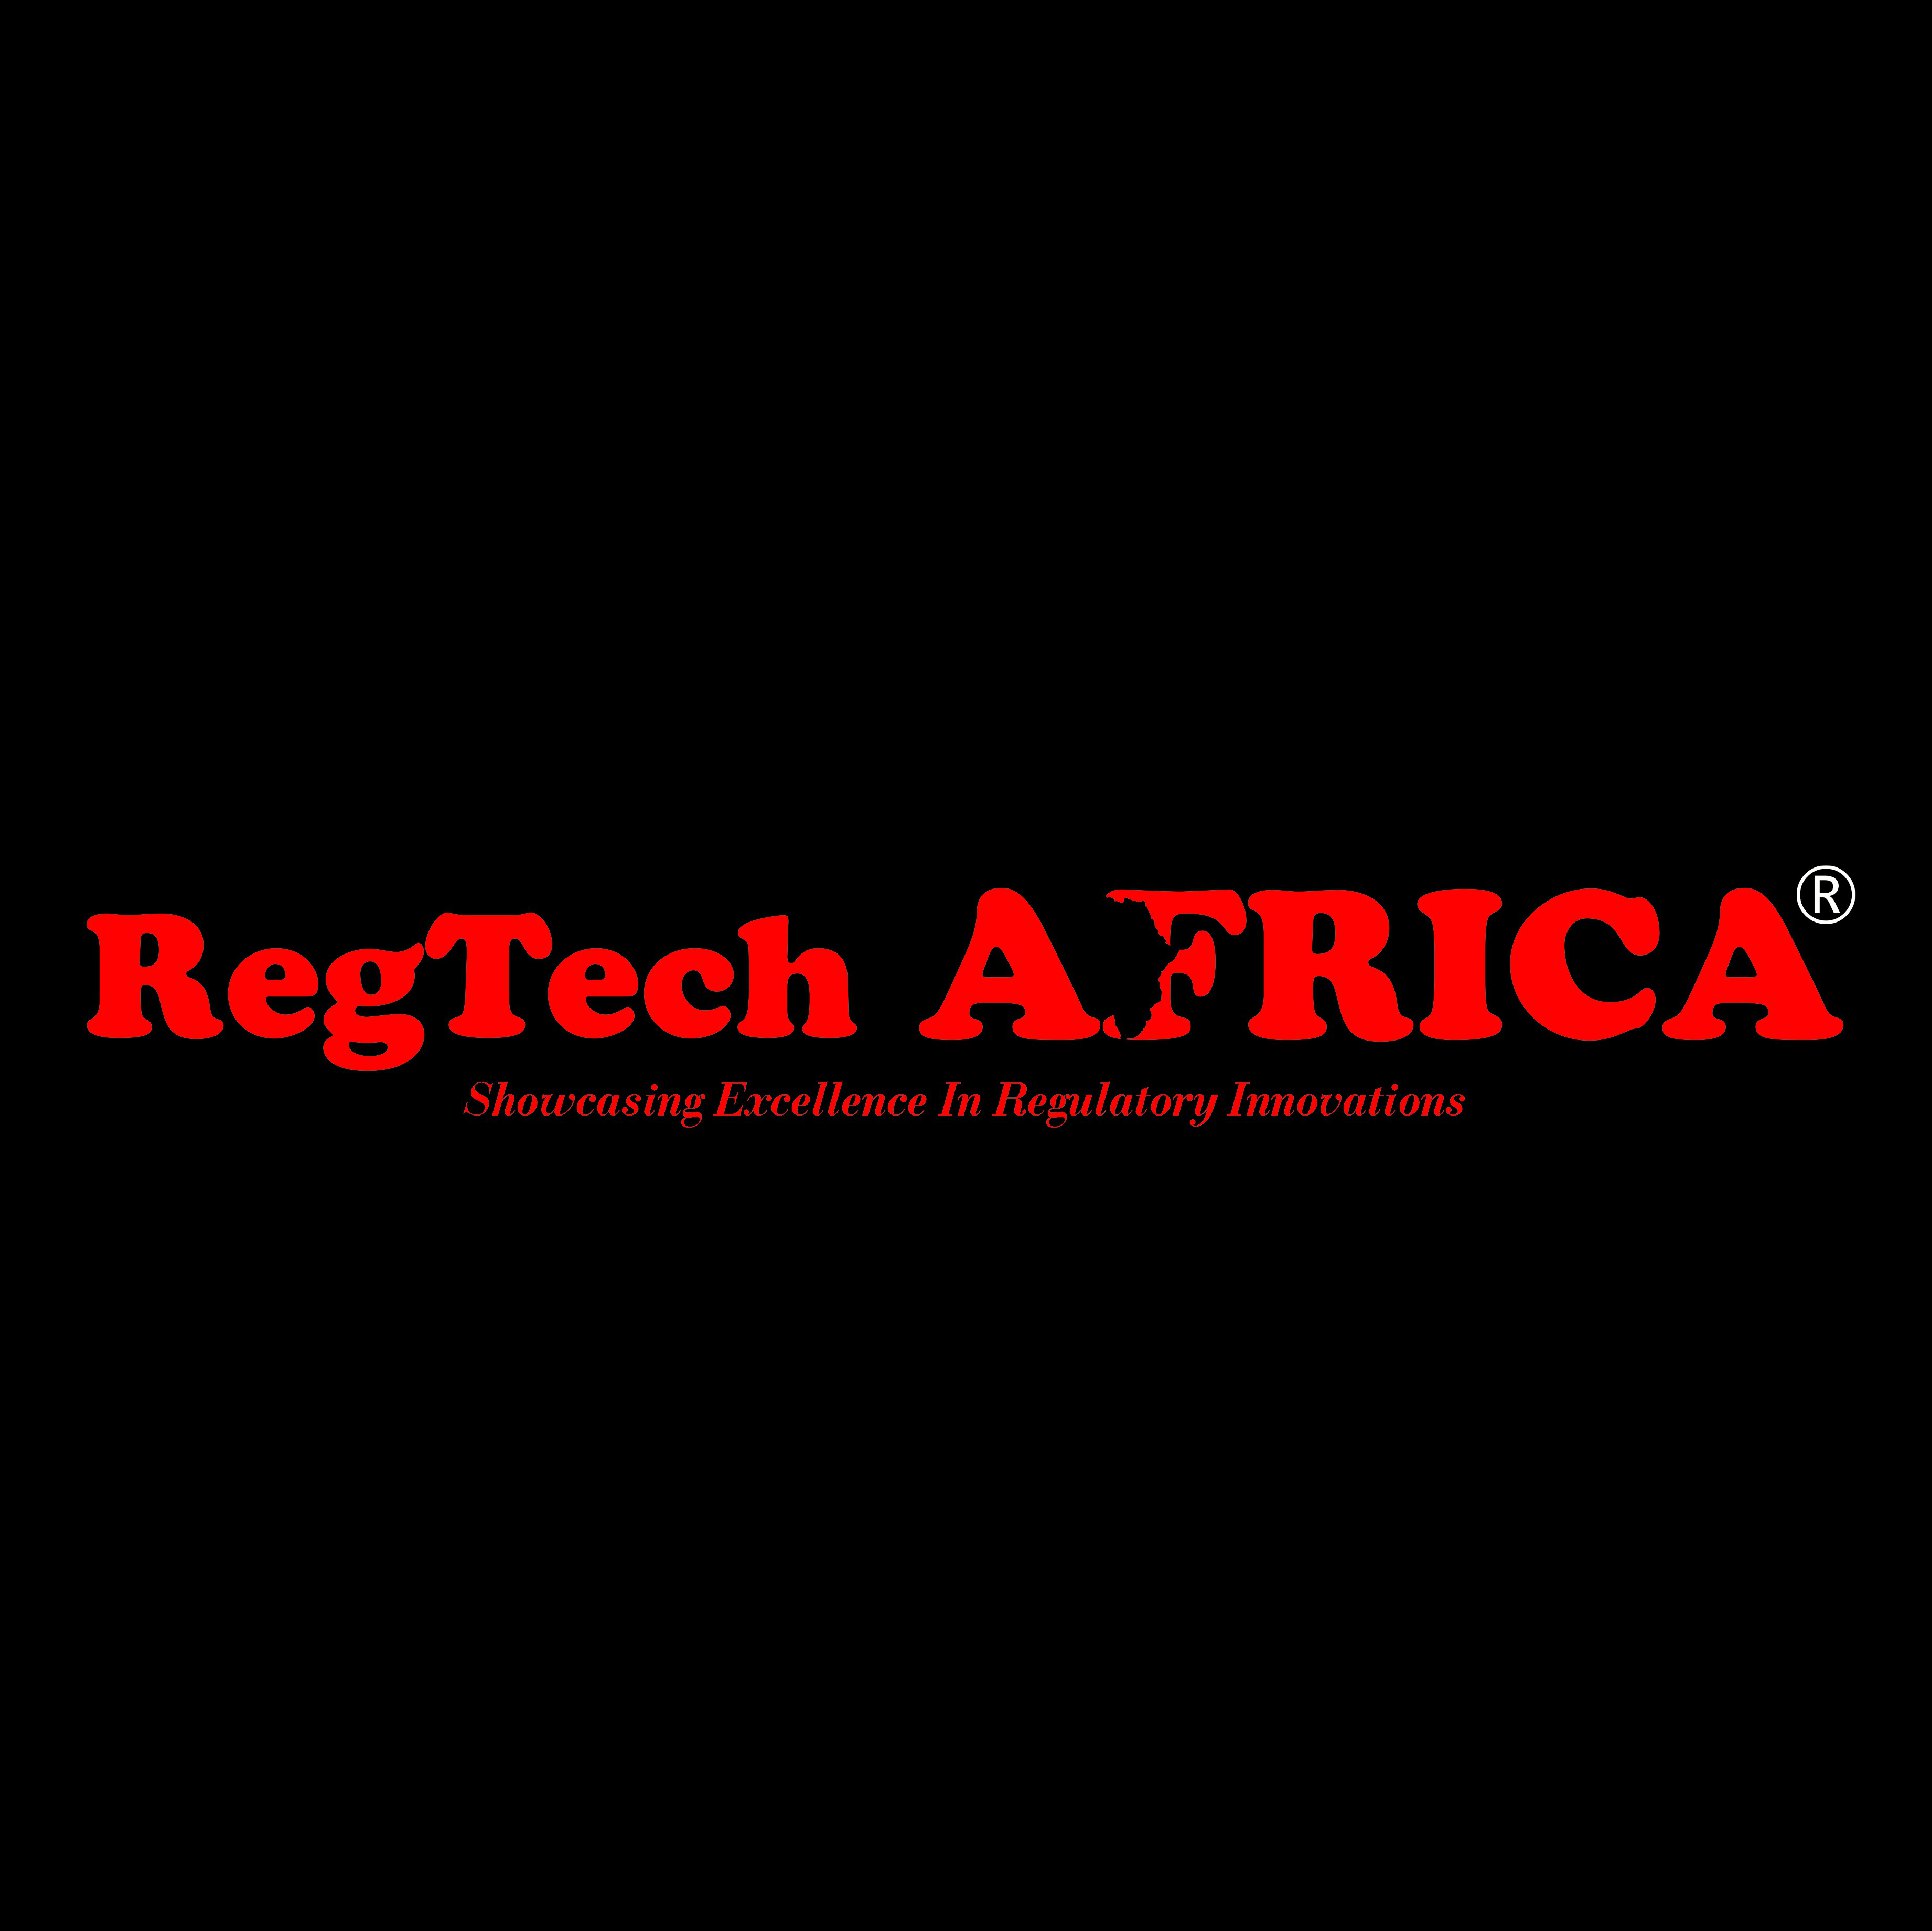 RegTech Africa conference to propel in digital economy